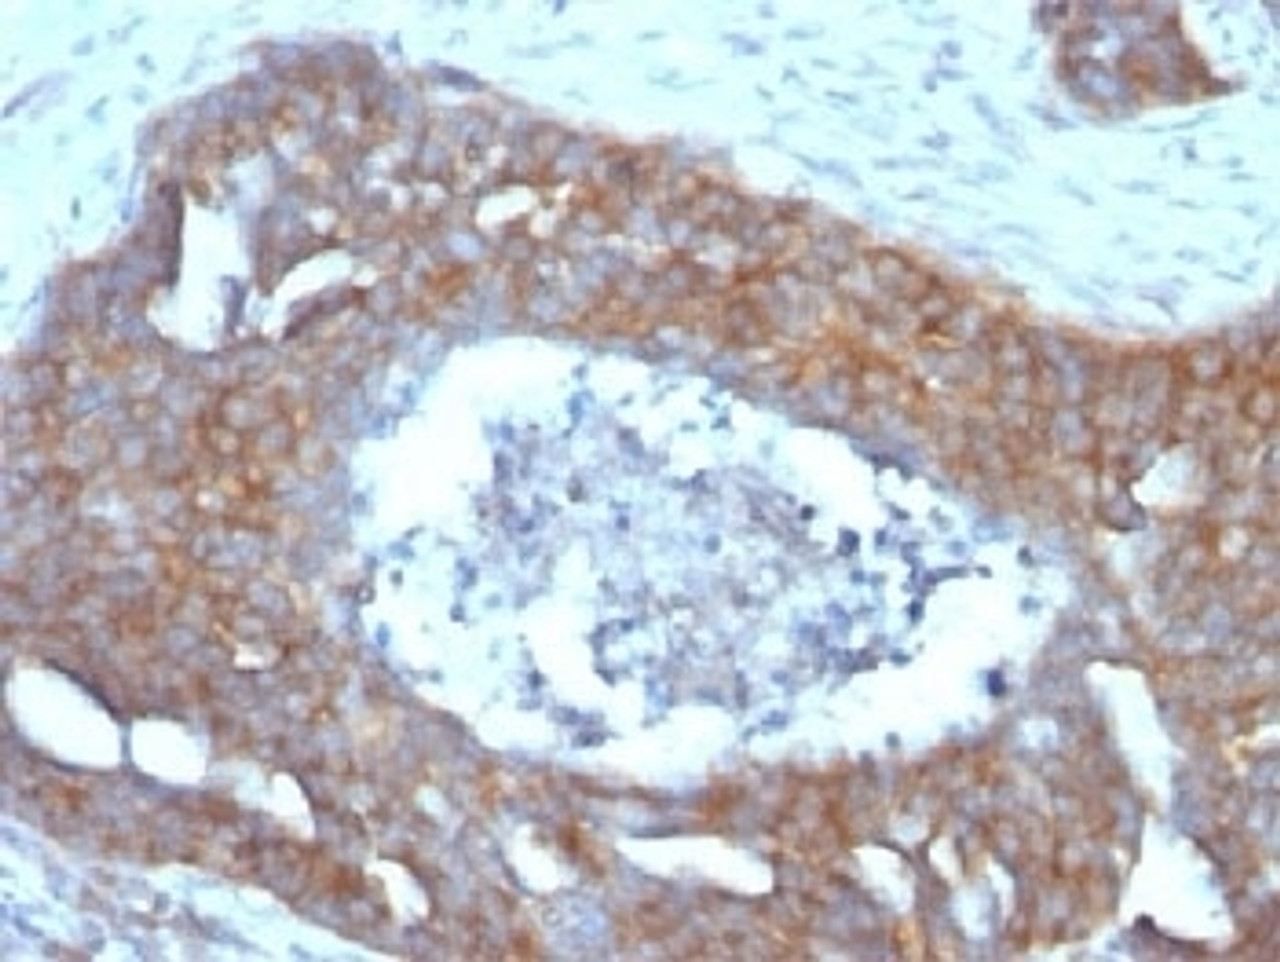 IHC testing of FFPE human ovarian carcinoma with Estrogen Inducible Protein pS2 antibody